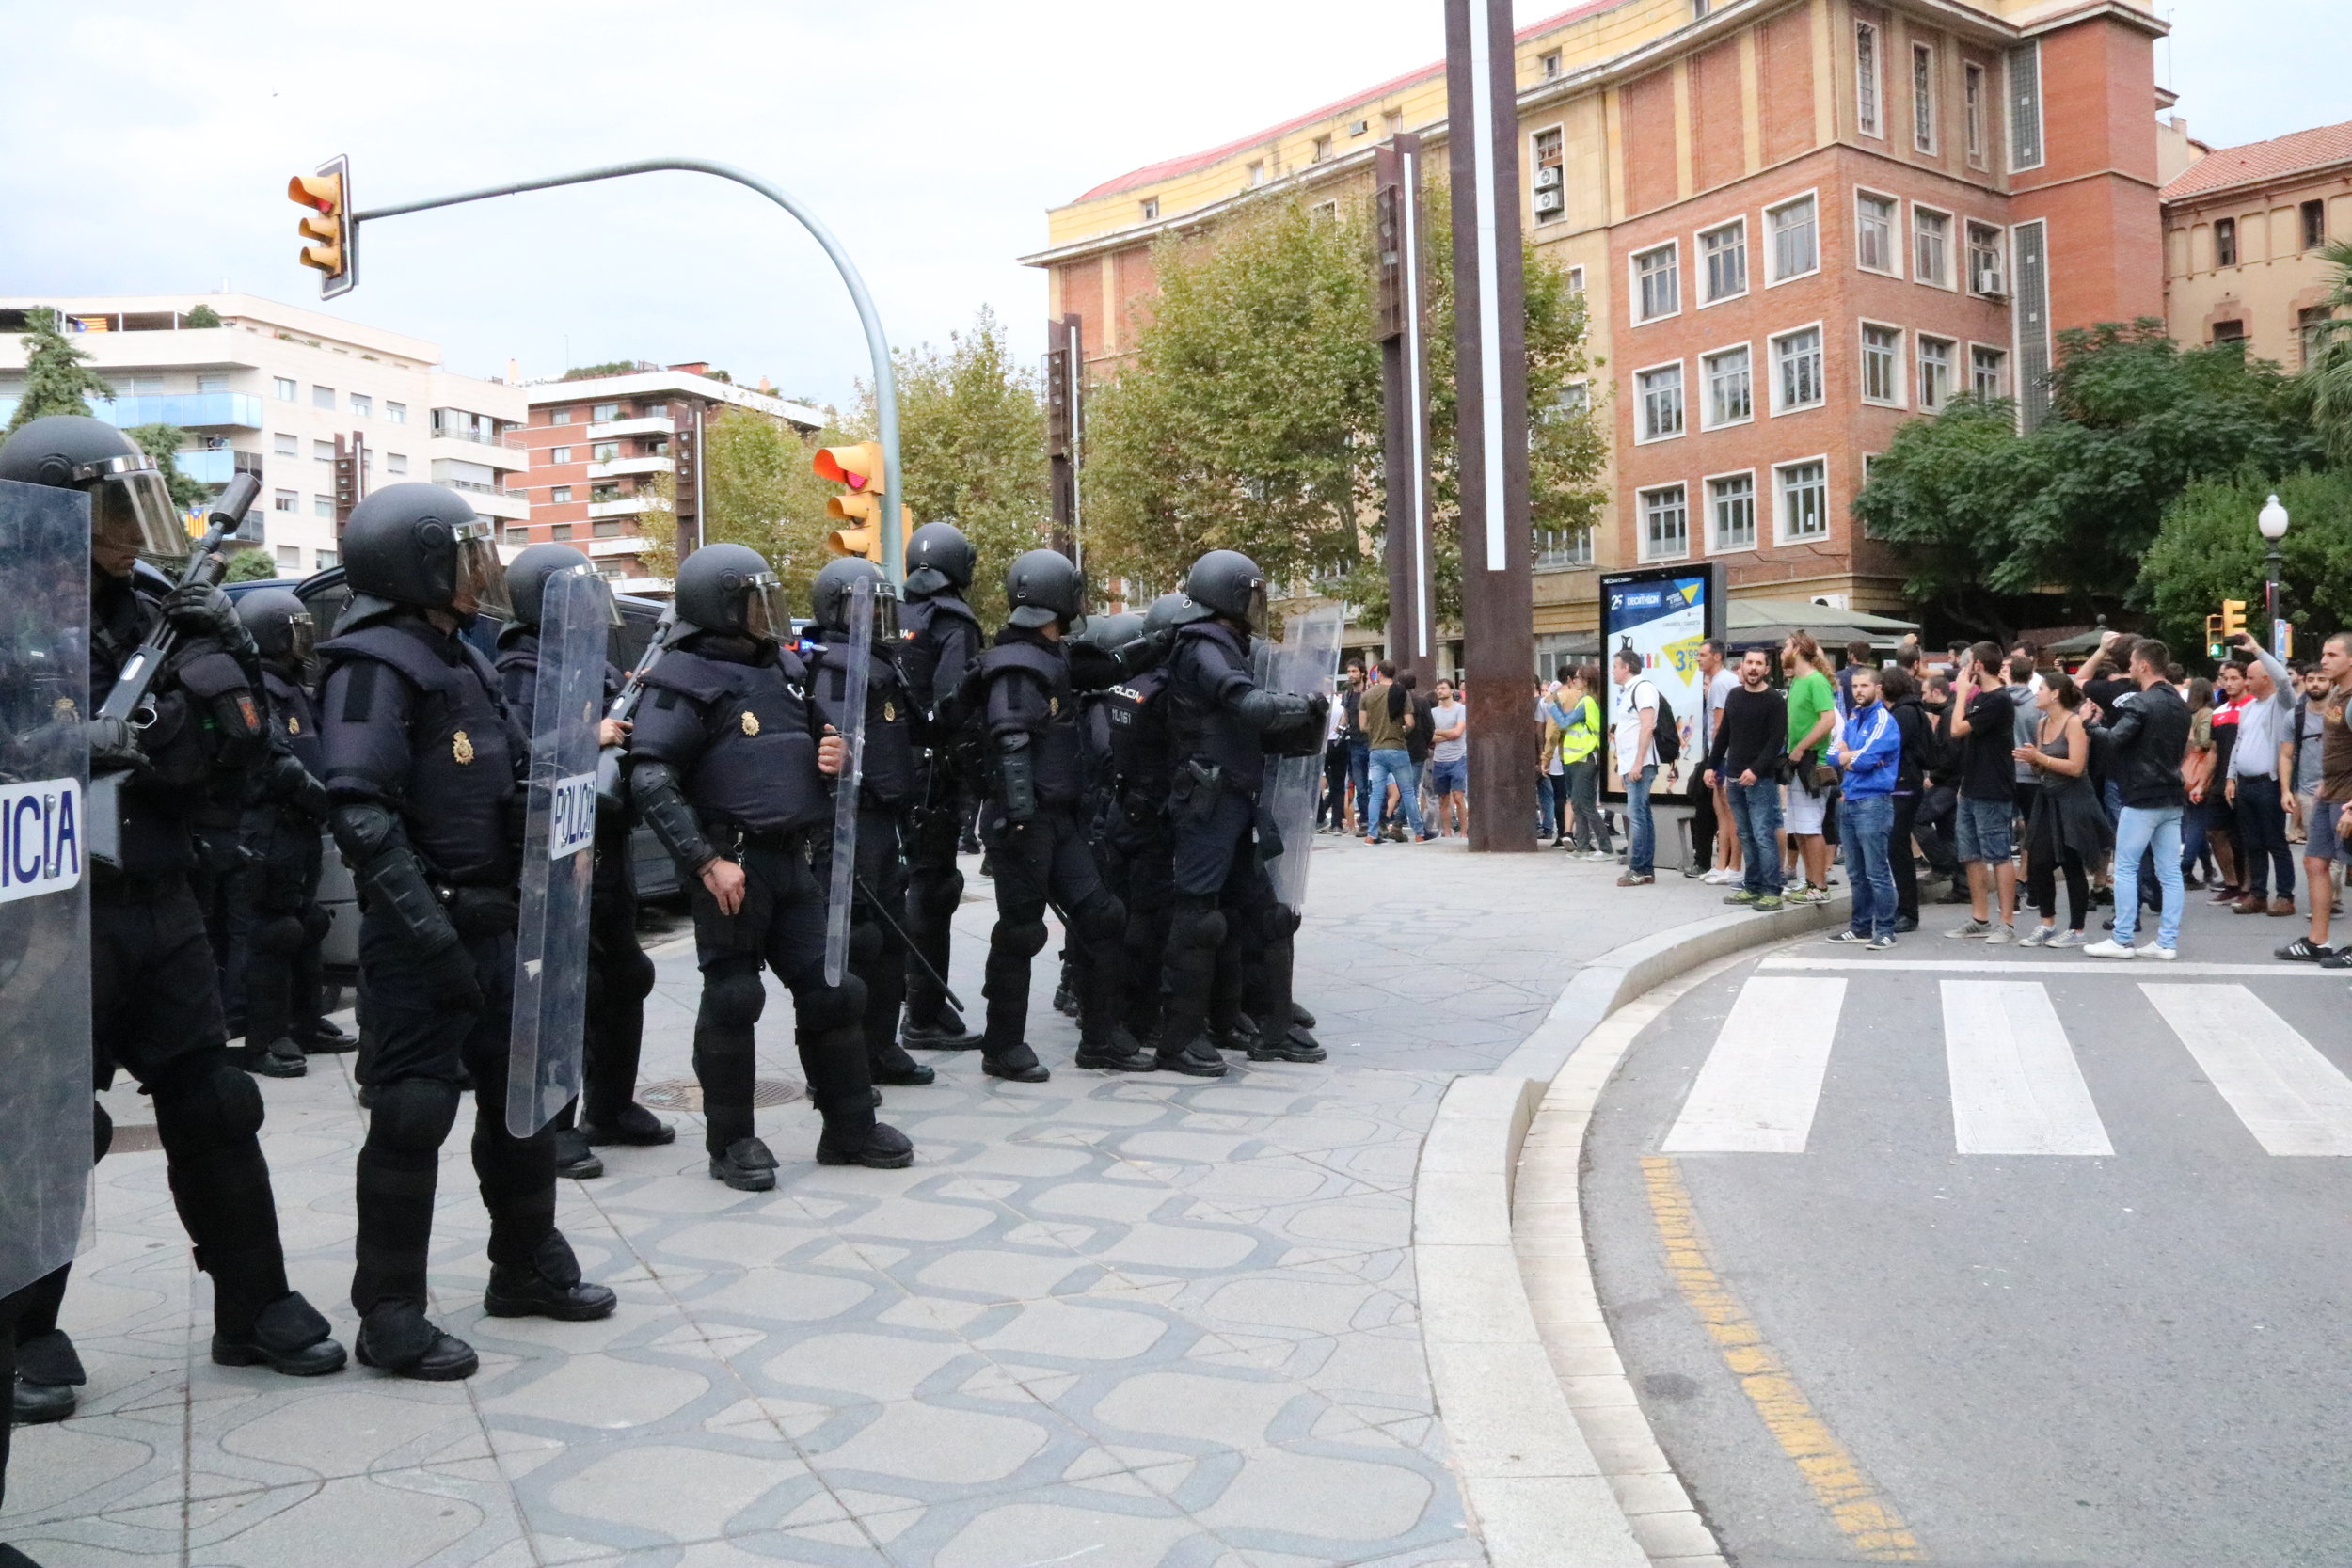 Some police officers in a Tarragona square on October 1, 2017 (by Núria Torres)